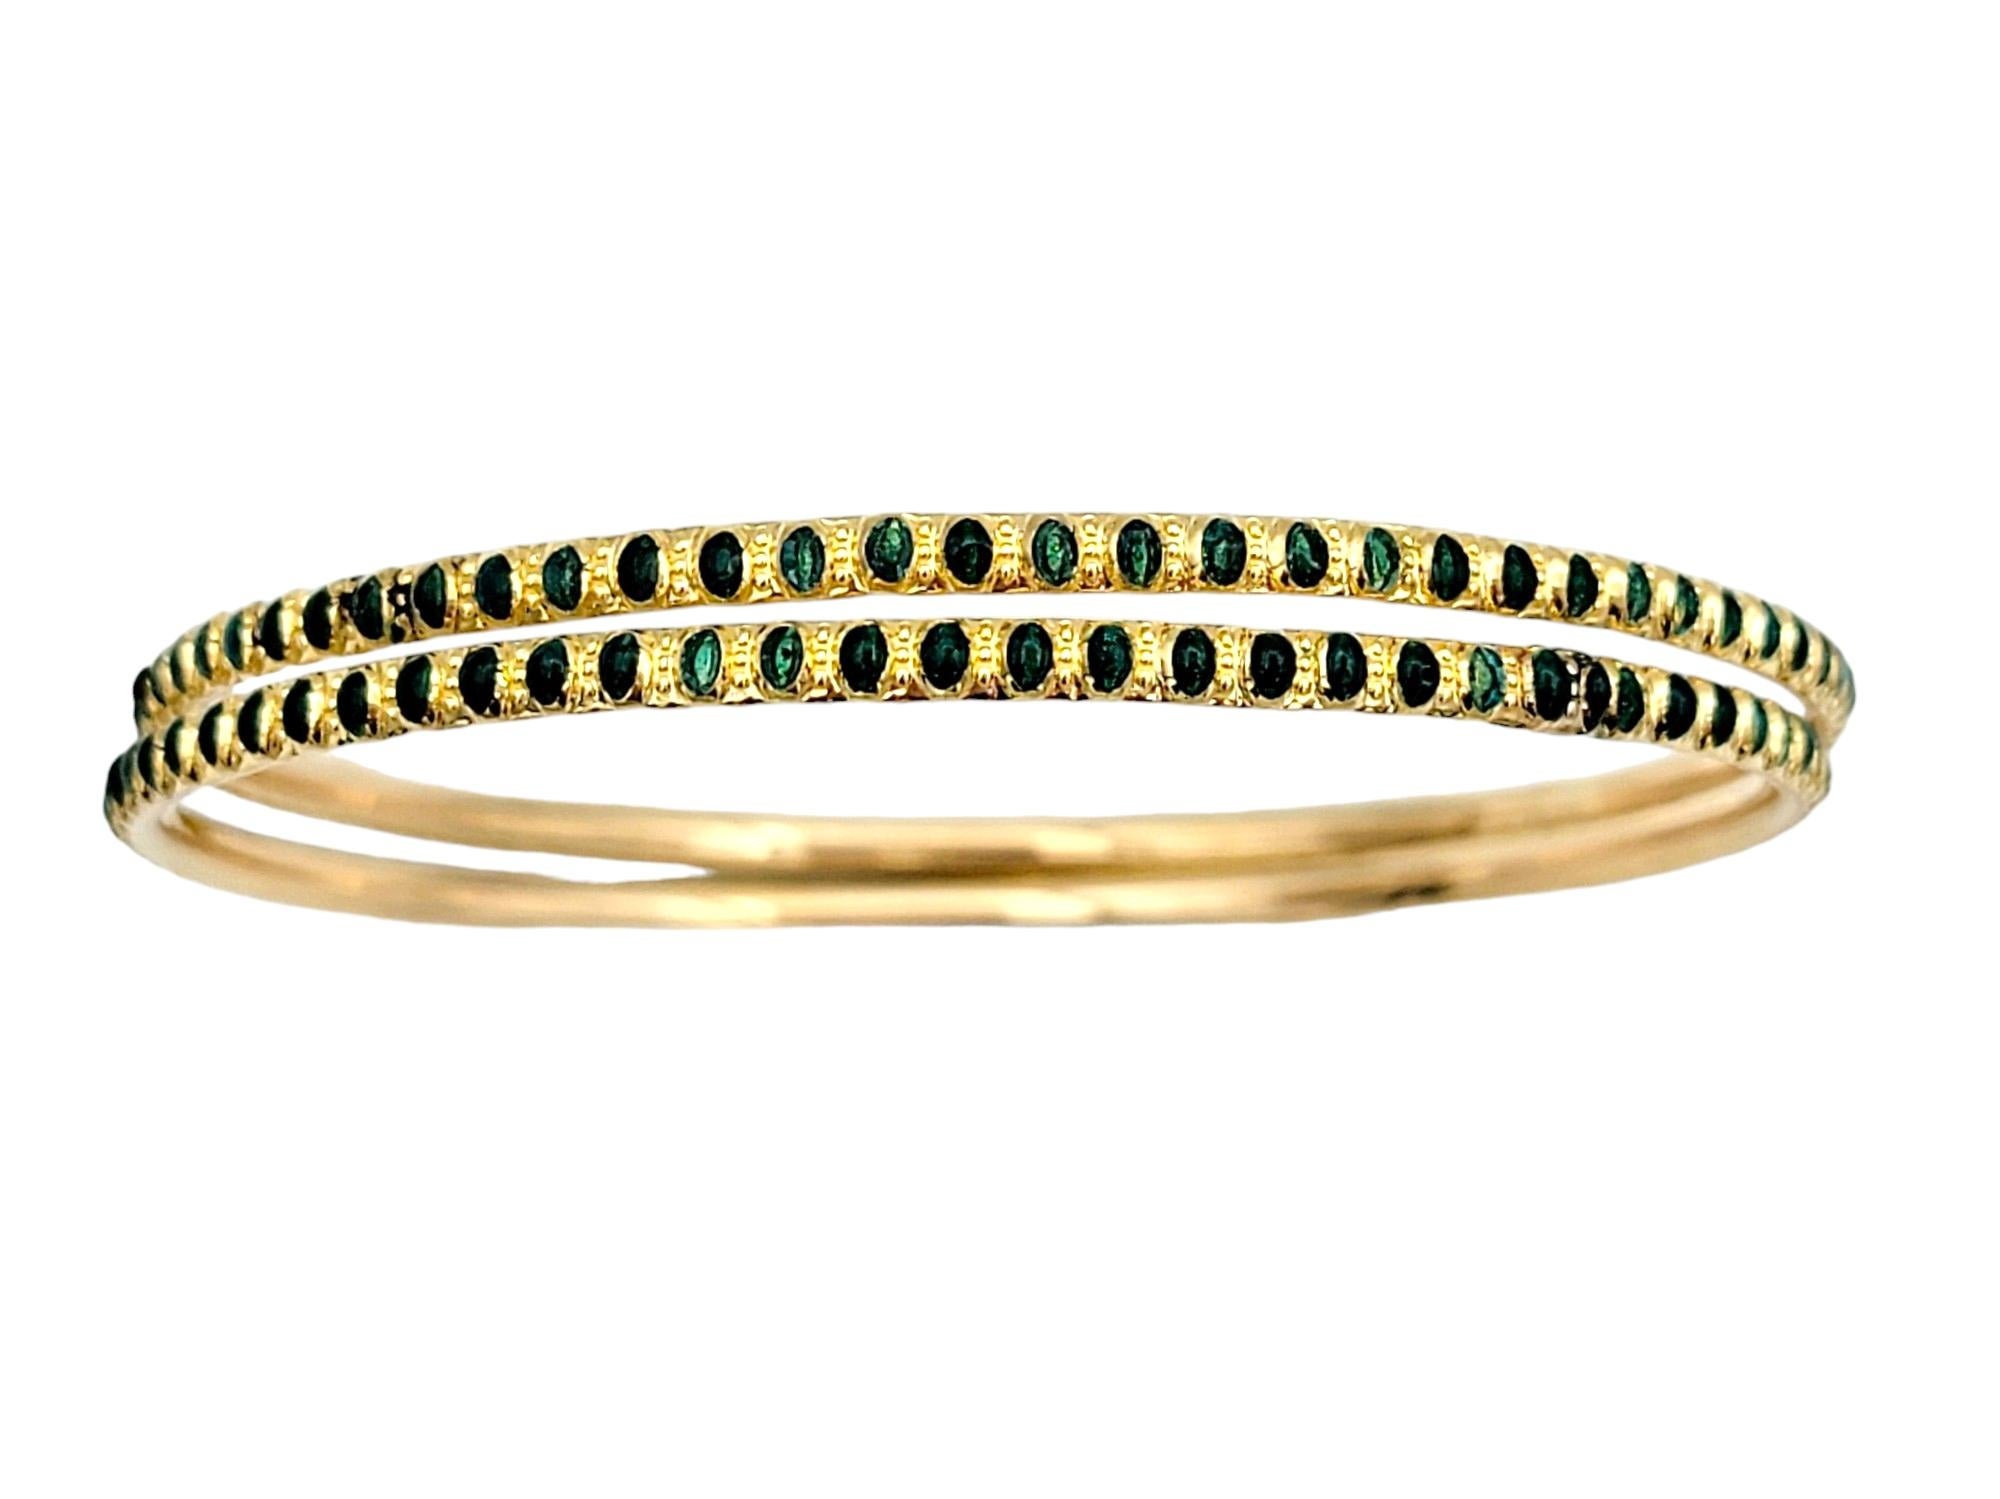 Introducing a stunning set of two narrow stacking bangle bracelets crafted in luxurious 22 karat yellow gold. These identical pieces are adorned with a mesmerizing dark green enamel dotted design that spans the entire length of the bracelets, adding